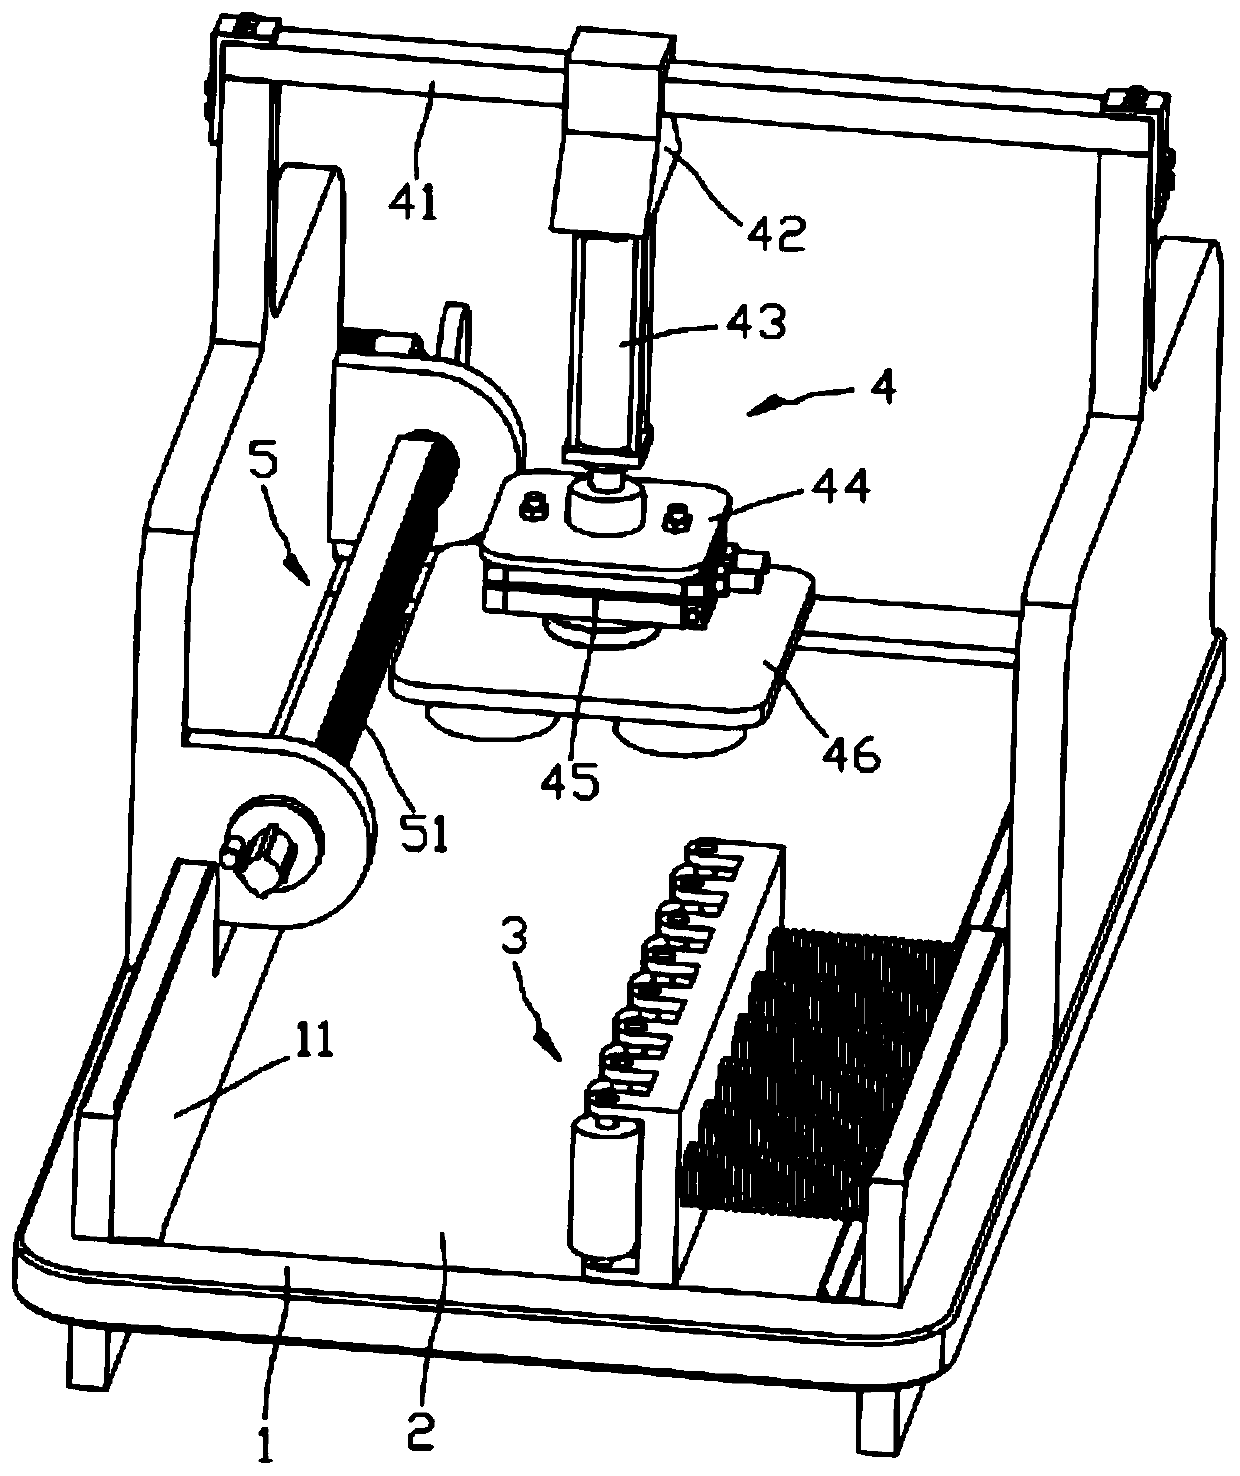 A glass edging device